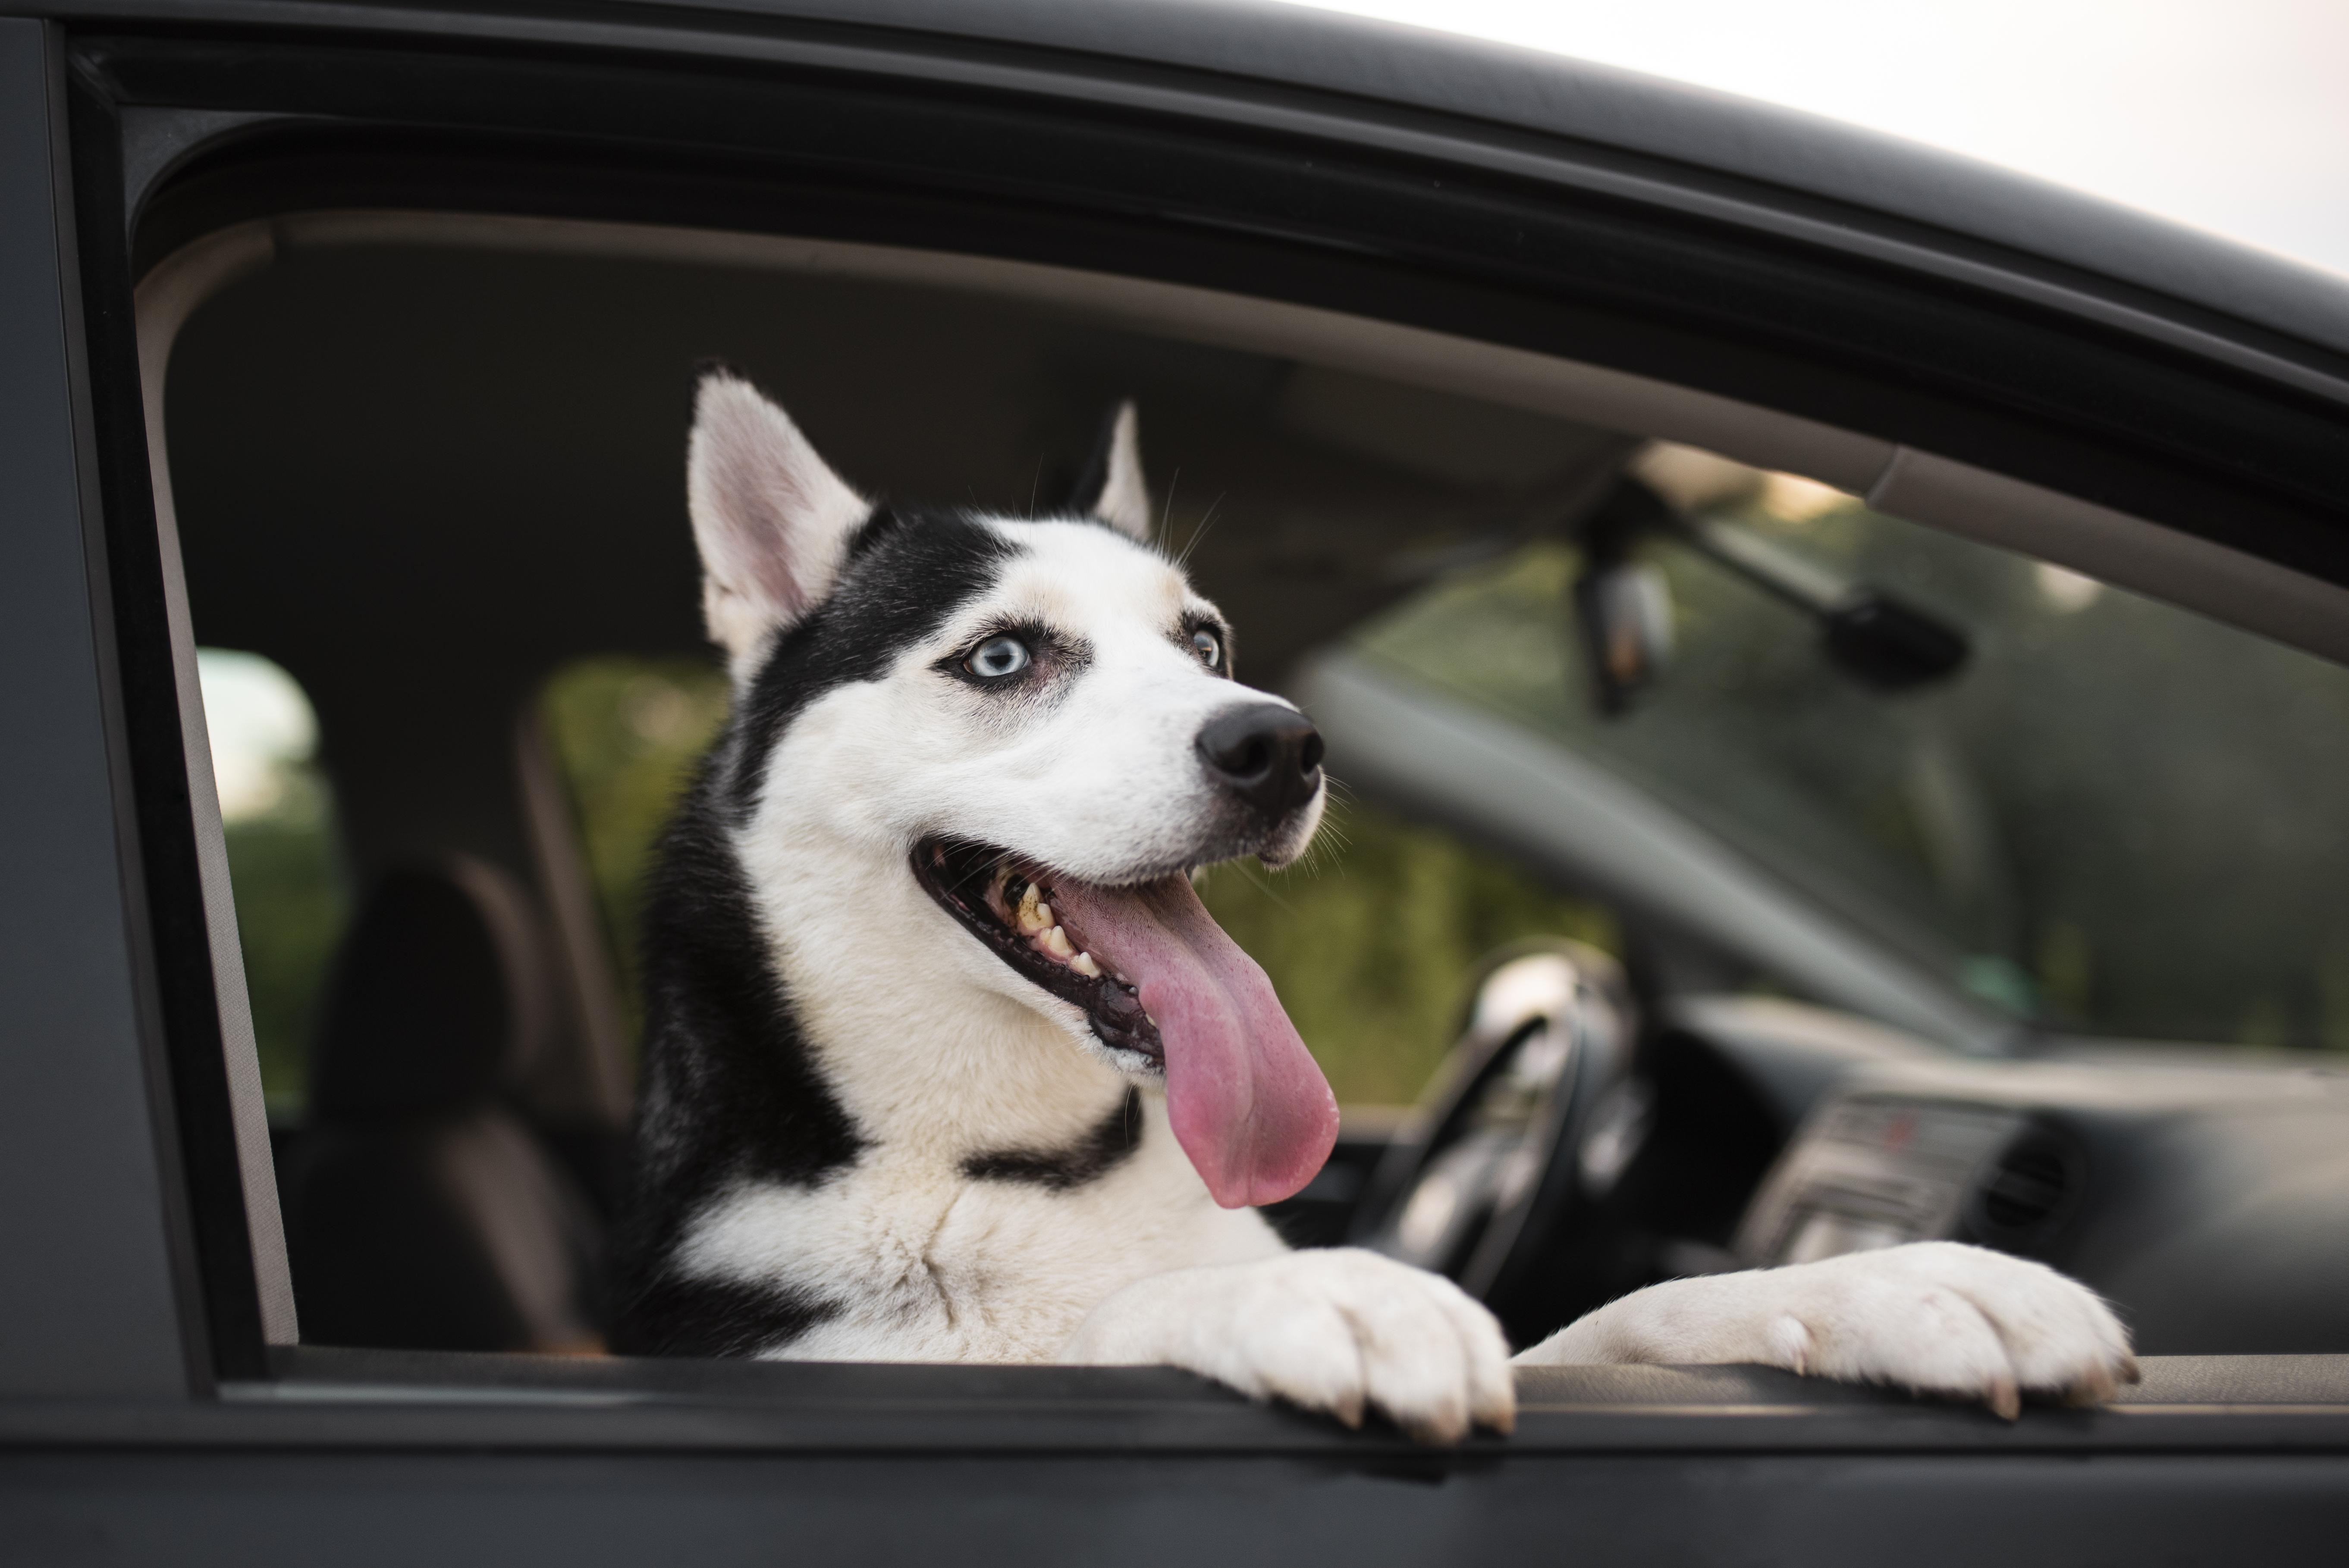 Car Travel with Pets: Safety Tips for You and Your Dog